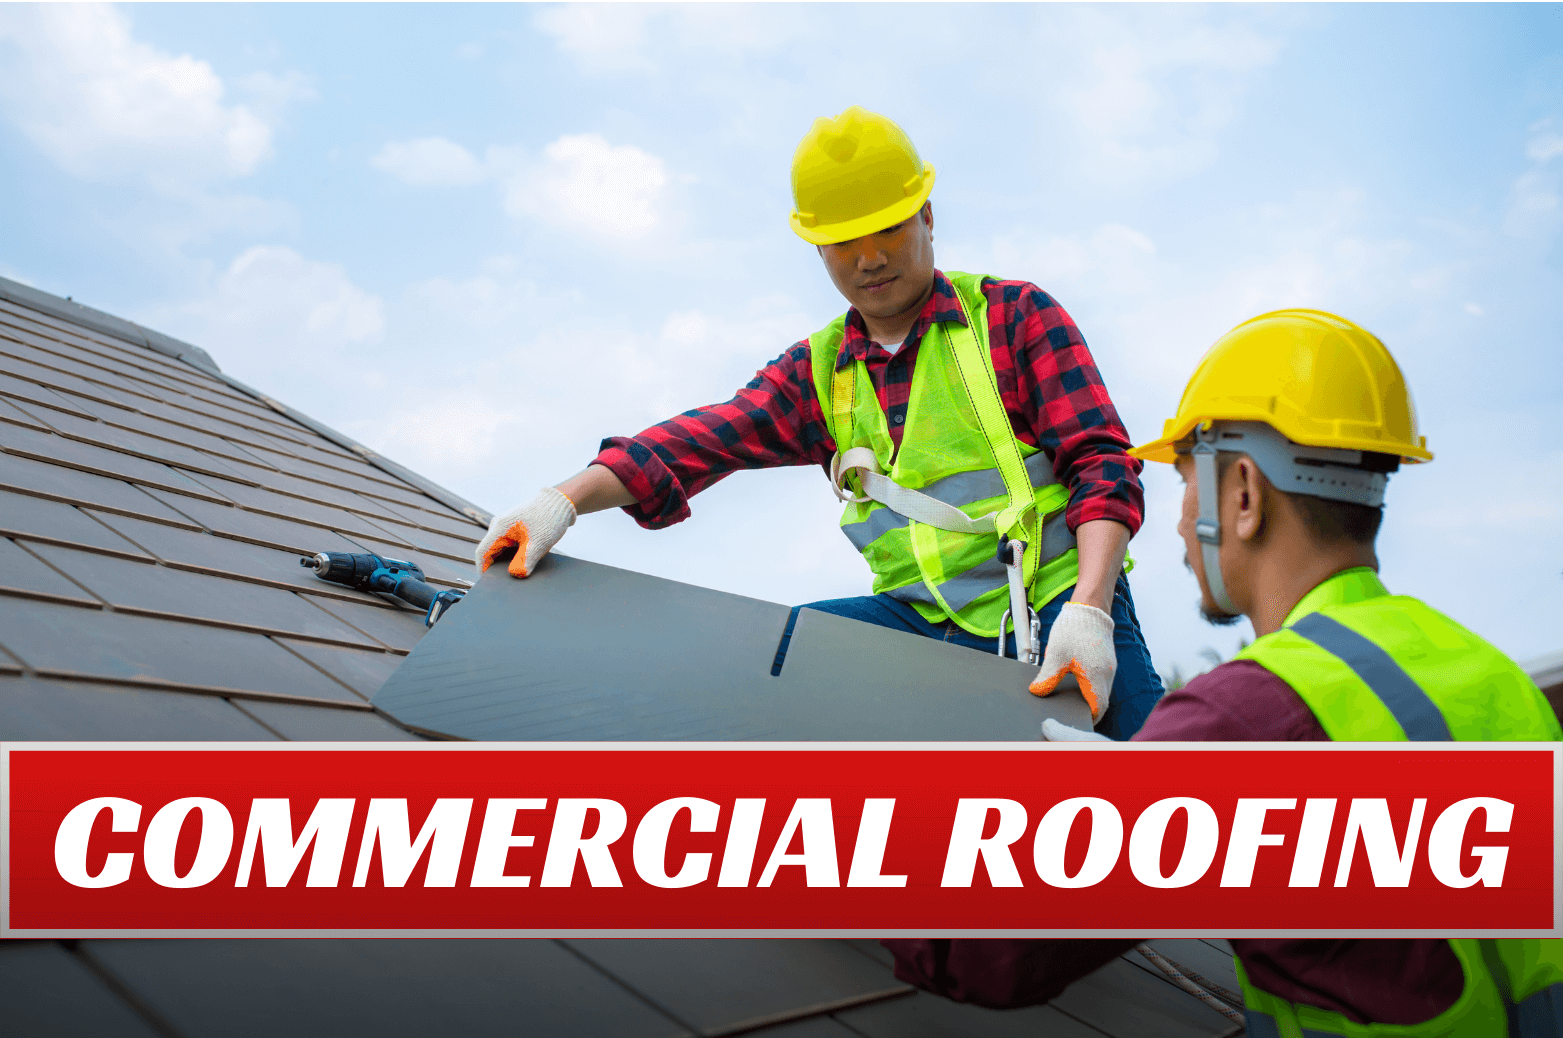 MK Best Roofing: Commercial Roofing Services near Me